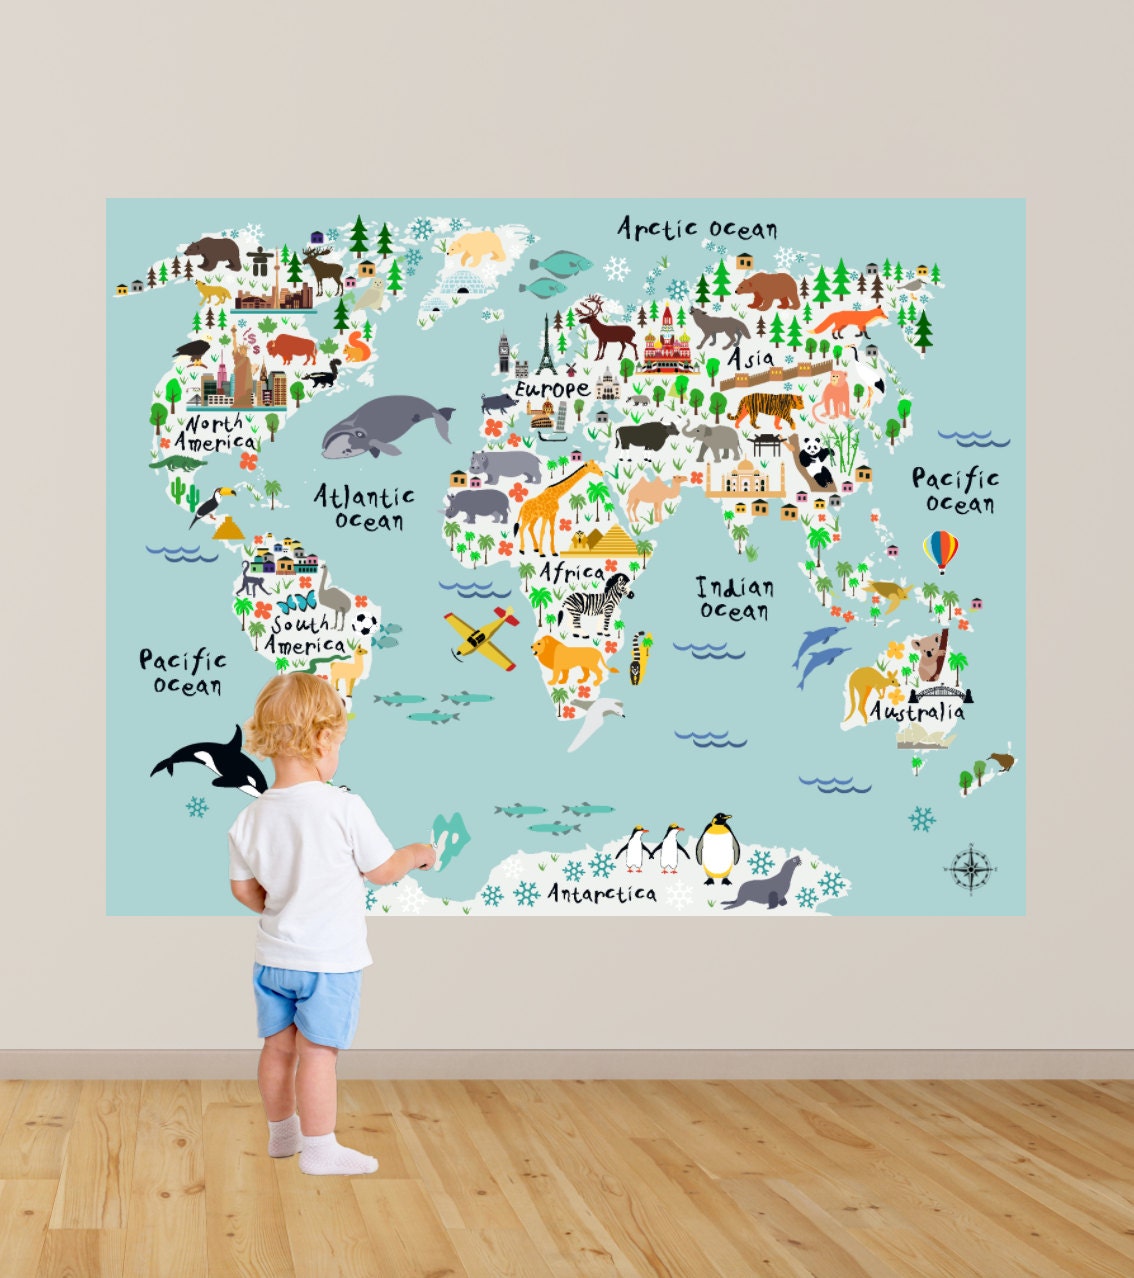 Global World Map Atlas Easy to Apply Vinyl Wall Decal Removable Sticker 1601 